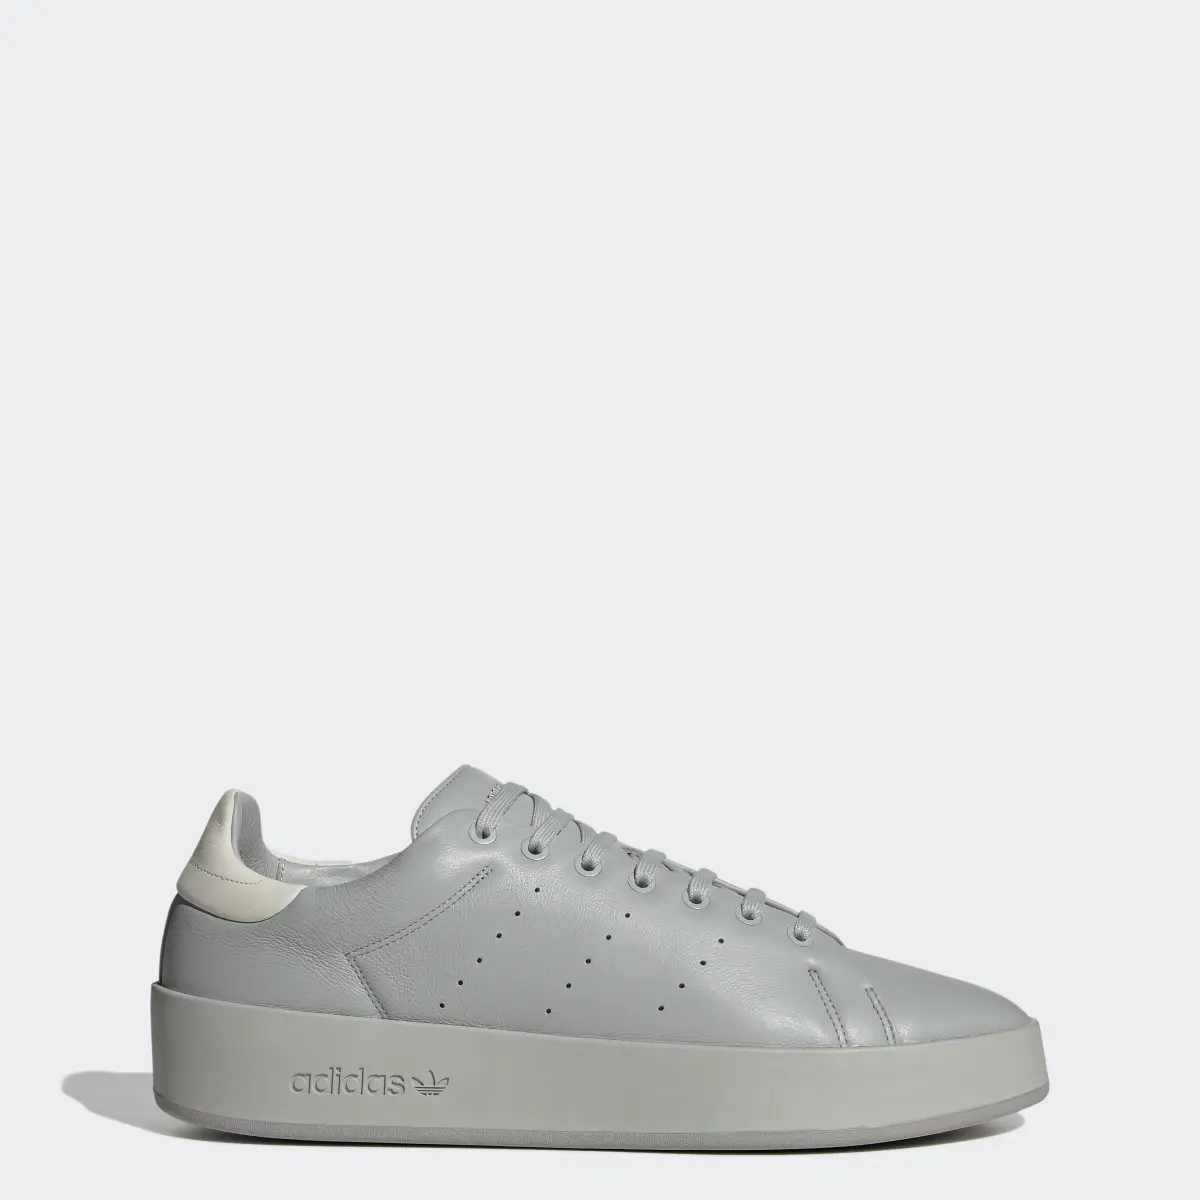 Adidas Chaussure Stan Smith Recon. 1